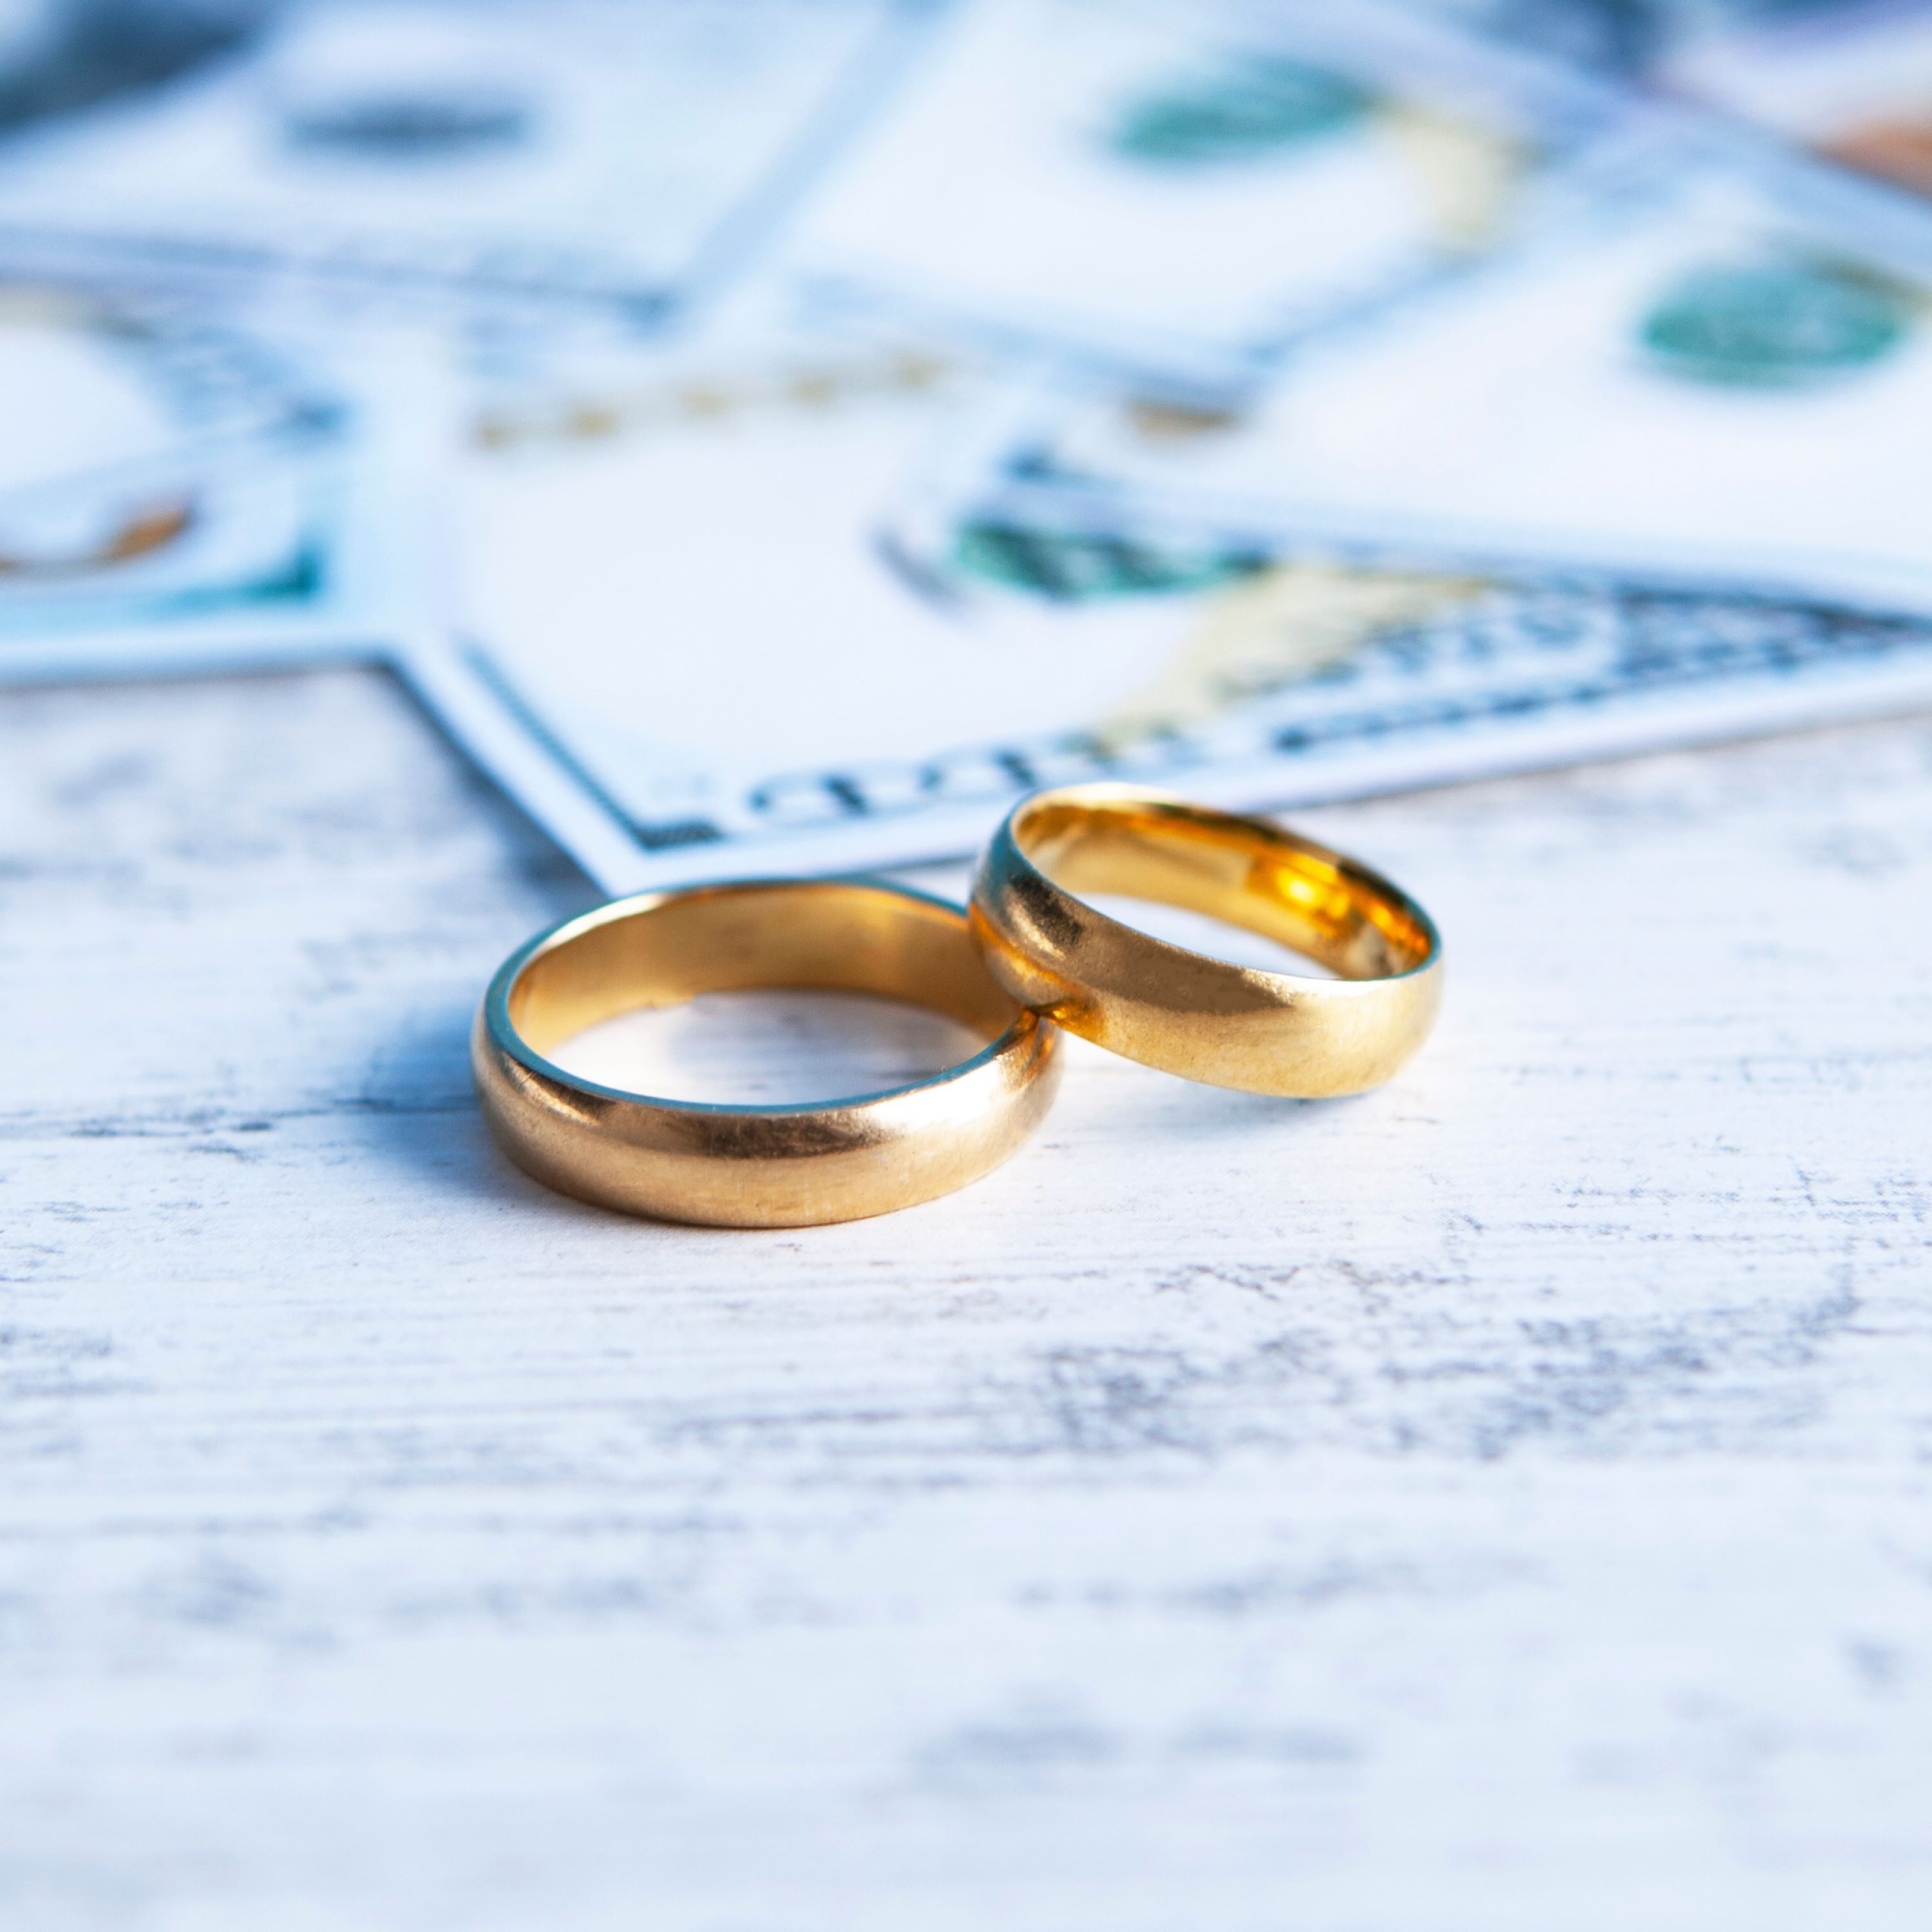 Options for Financing Your Divorce in the UK